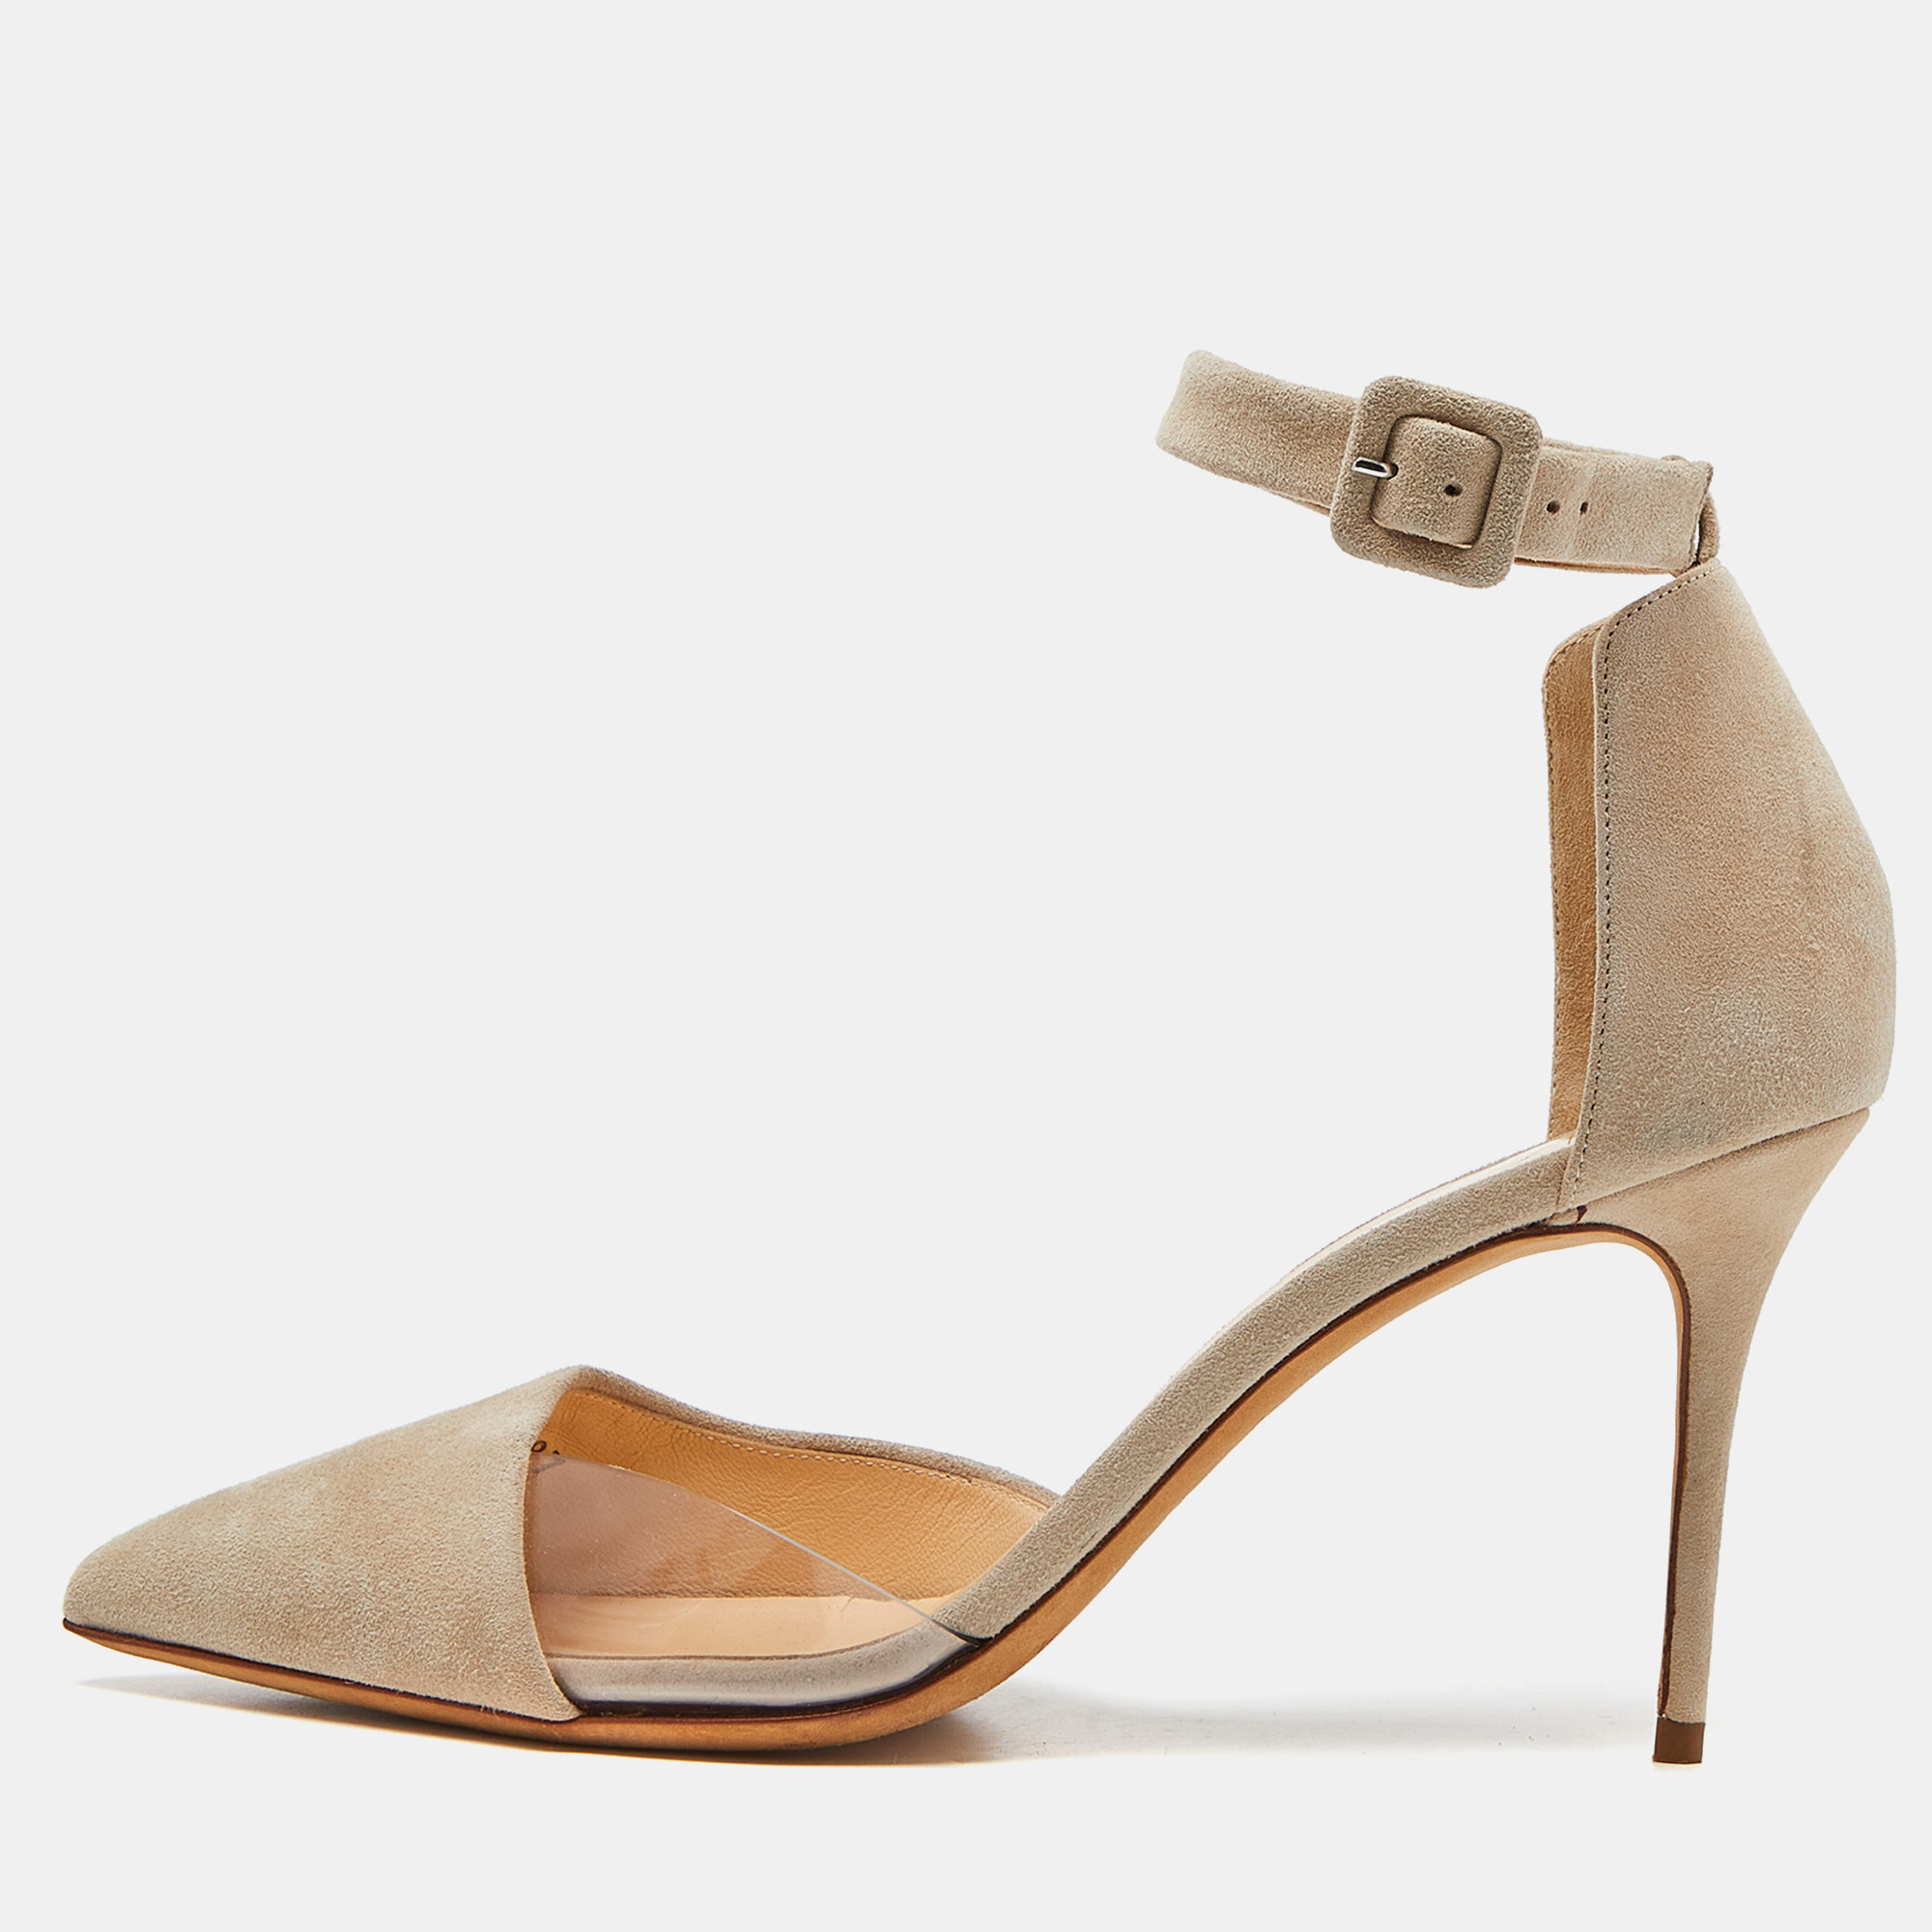 Giuseppe zanotti beige suede and pvc ankle strap d'orsay pumps size 39